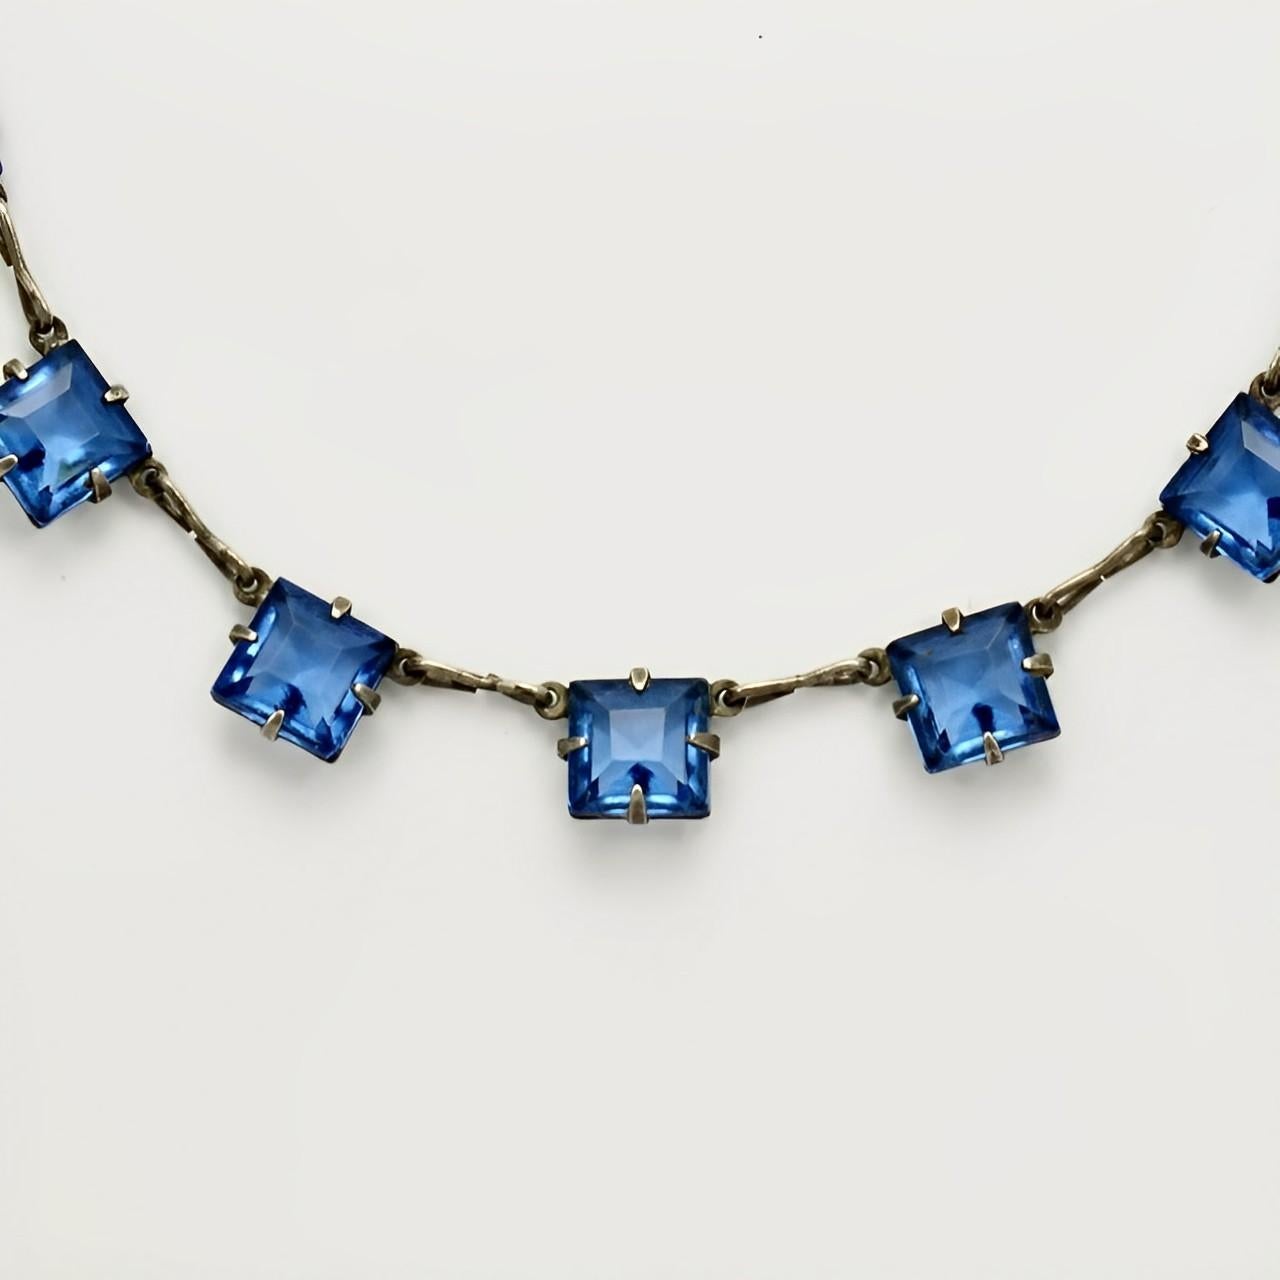 Art Deco silver tone chain necklace featuring beautiful square azure blue crystals in open back settings, with a spring bolt clasp. The faceted crystals are raised at the front and pointed at the back, for maximum sparkle. The chain links are